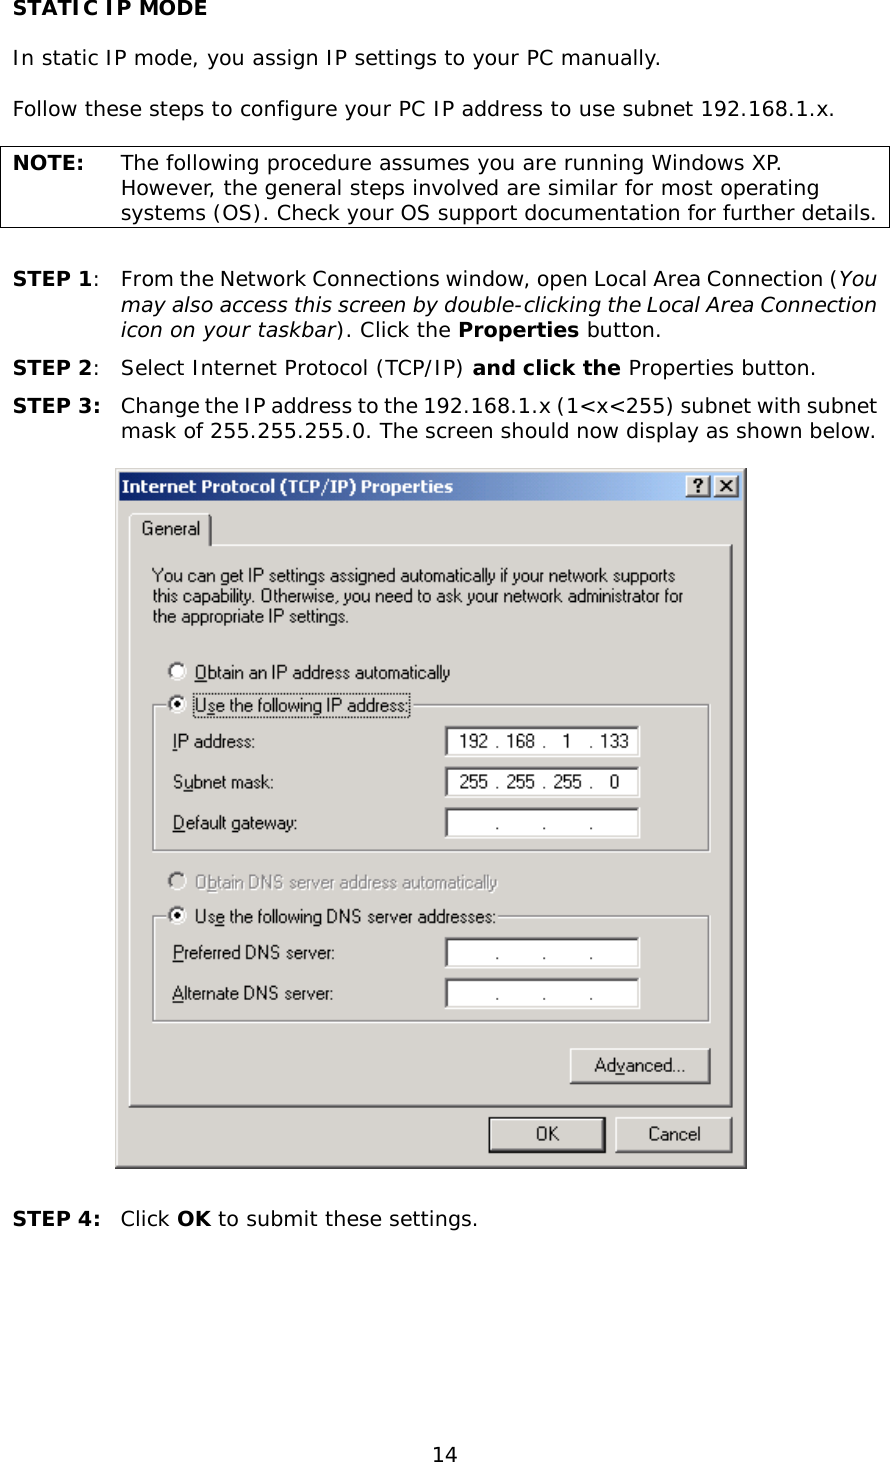  14 STATIC IP MODE  In static IP mode, you assign IP settings to your PC manually.  Follow these steps to configure your PC IP address to use subnet 192.168.1.x.  NOTE: The following procedure assumes you are running Windows XP.  However, the general steps involved are similar for most operating systems (OS). Check your OS support documentation for further details.  STEP 1:  From the Network Connections window, open Local Area Connection (You may also access this screen by double-clicking the Local Area Connection icon on your taskbar). Click the Properties button. STEP 2:  Select Internet Protocol (TCP/IP) and click the Properties button. STEP 3: Change the IP address to the 192.168.1.x (1&lt;x&lt;255) subnet with subnet mask of 255.255.255.0. The screen should now display as shown below.     STEP 4:  Click OK to submit these settings.  